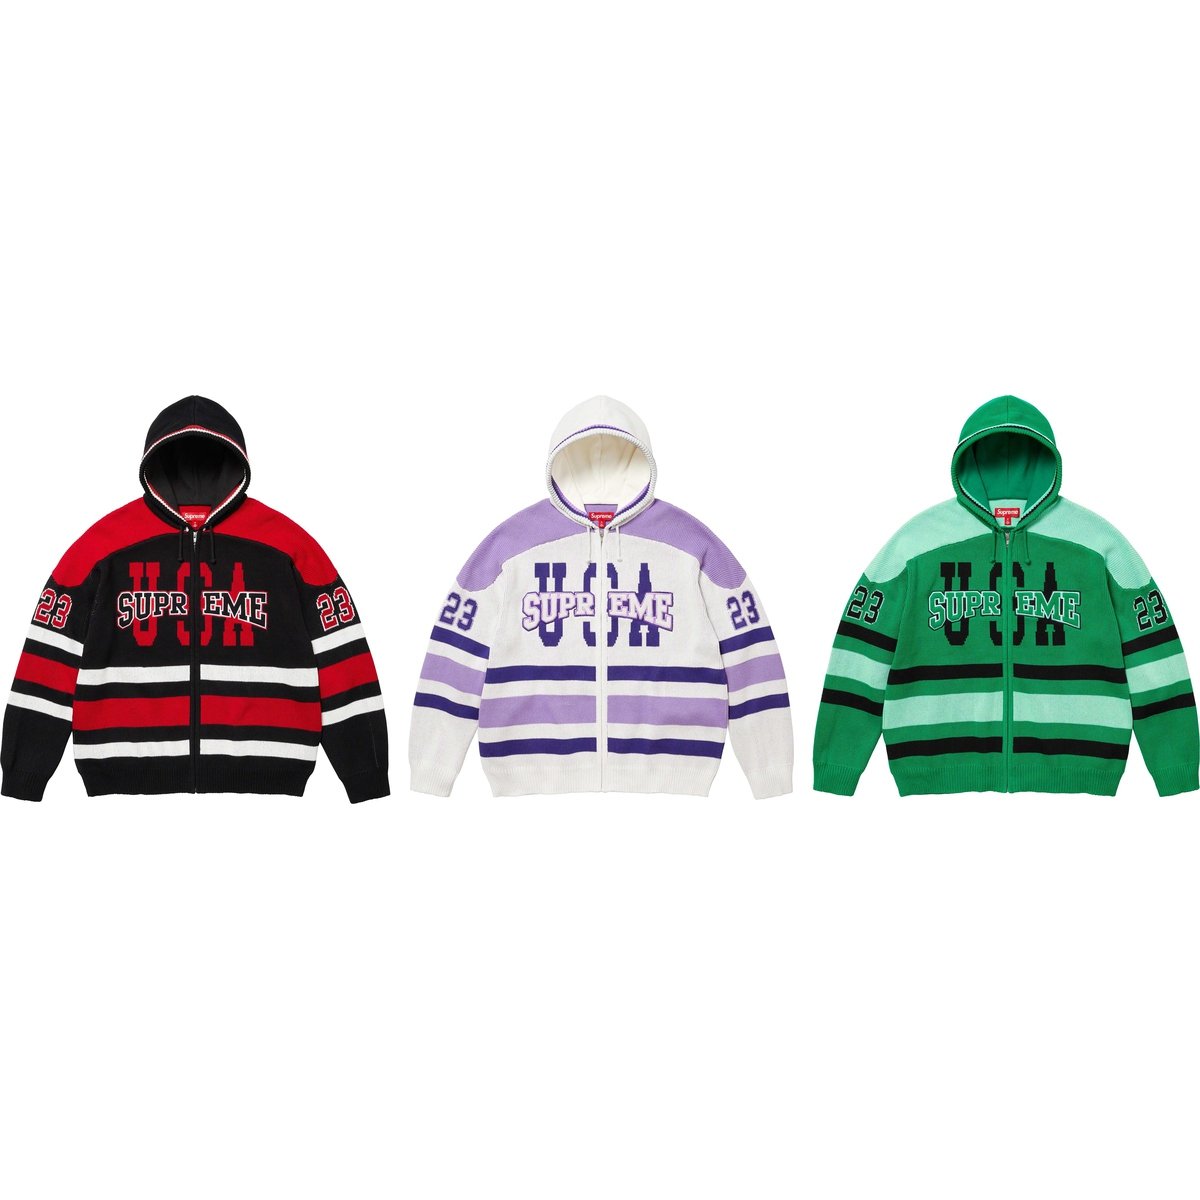 Supreme USA Zip Up Hooded Sweater for fall winter 23 season